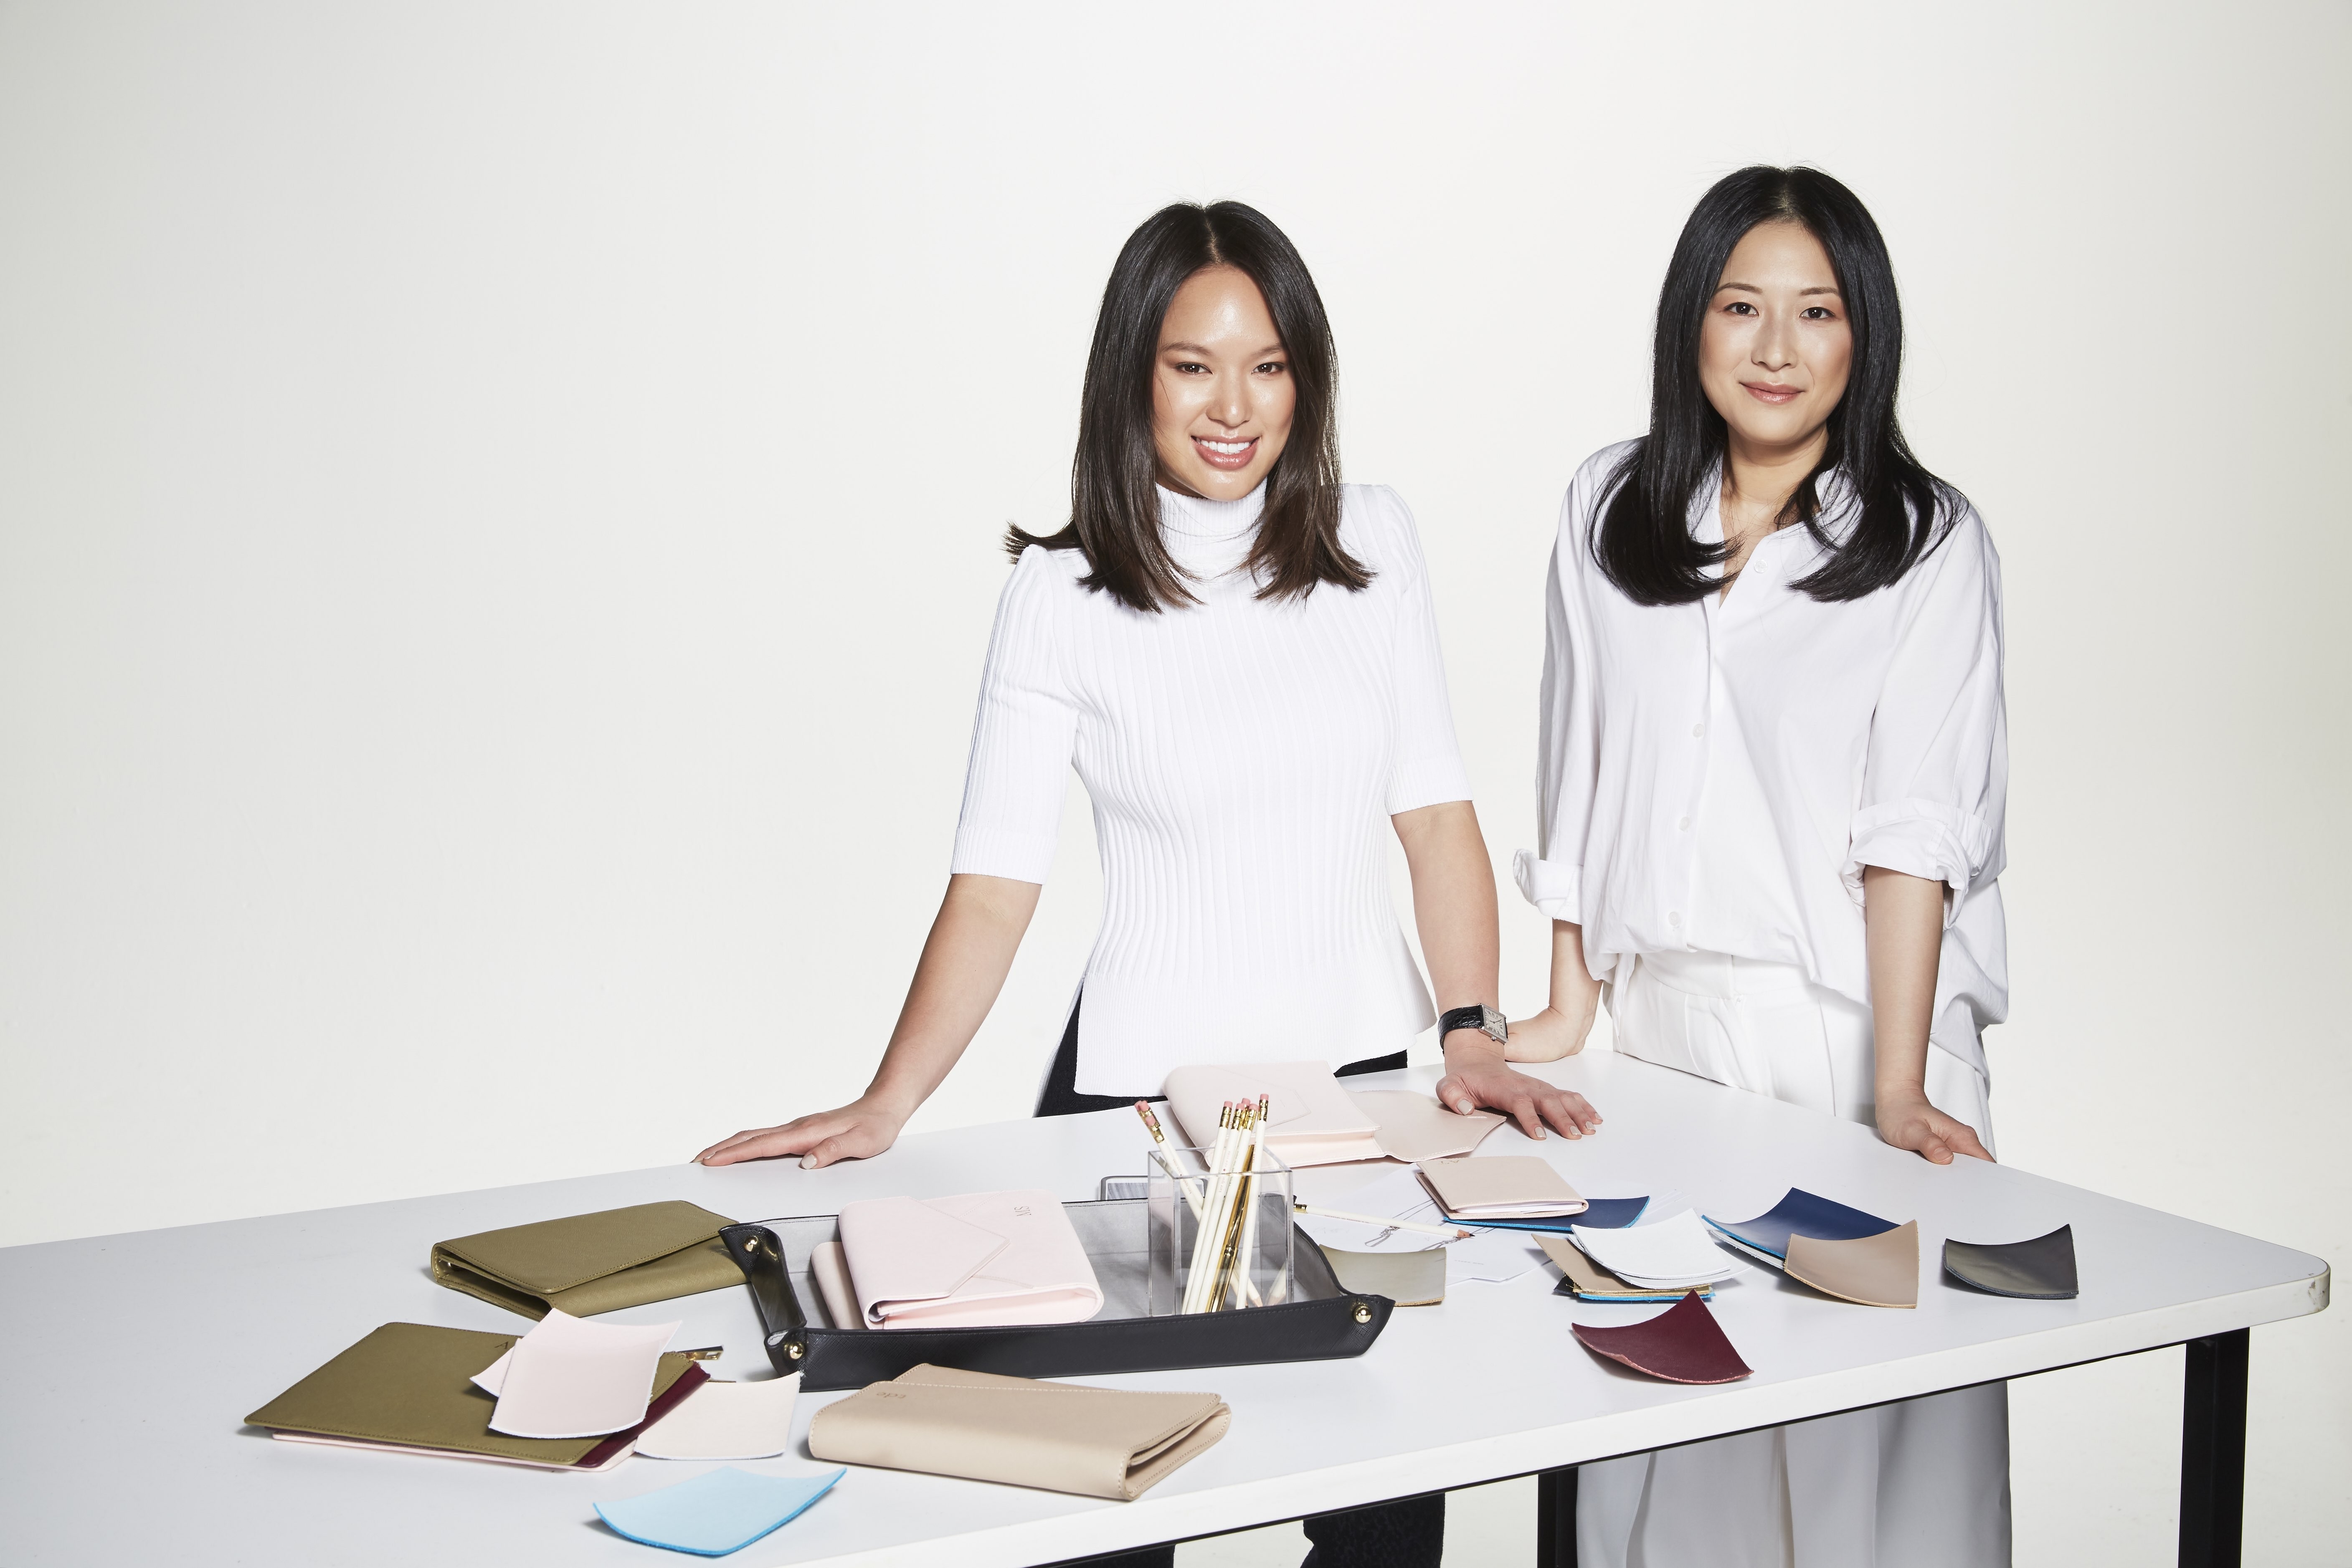 The Daily Edited’s founders, Alyce Tran and Tania Liu, have made the leather lifestyle goods company a huge success.